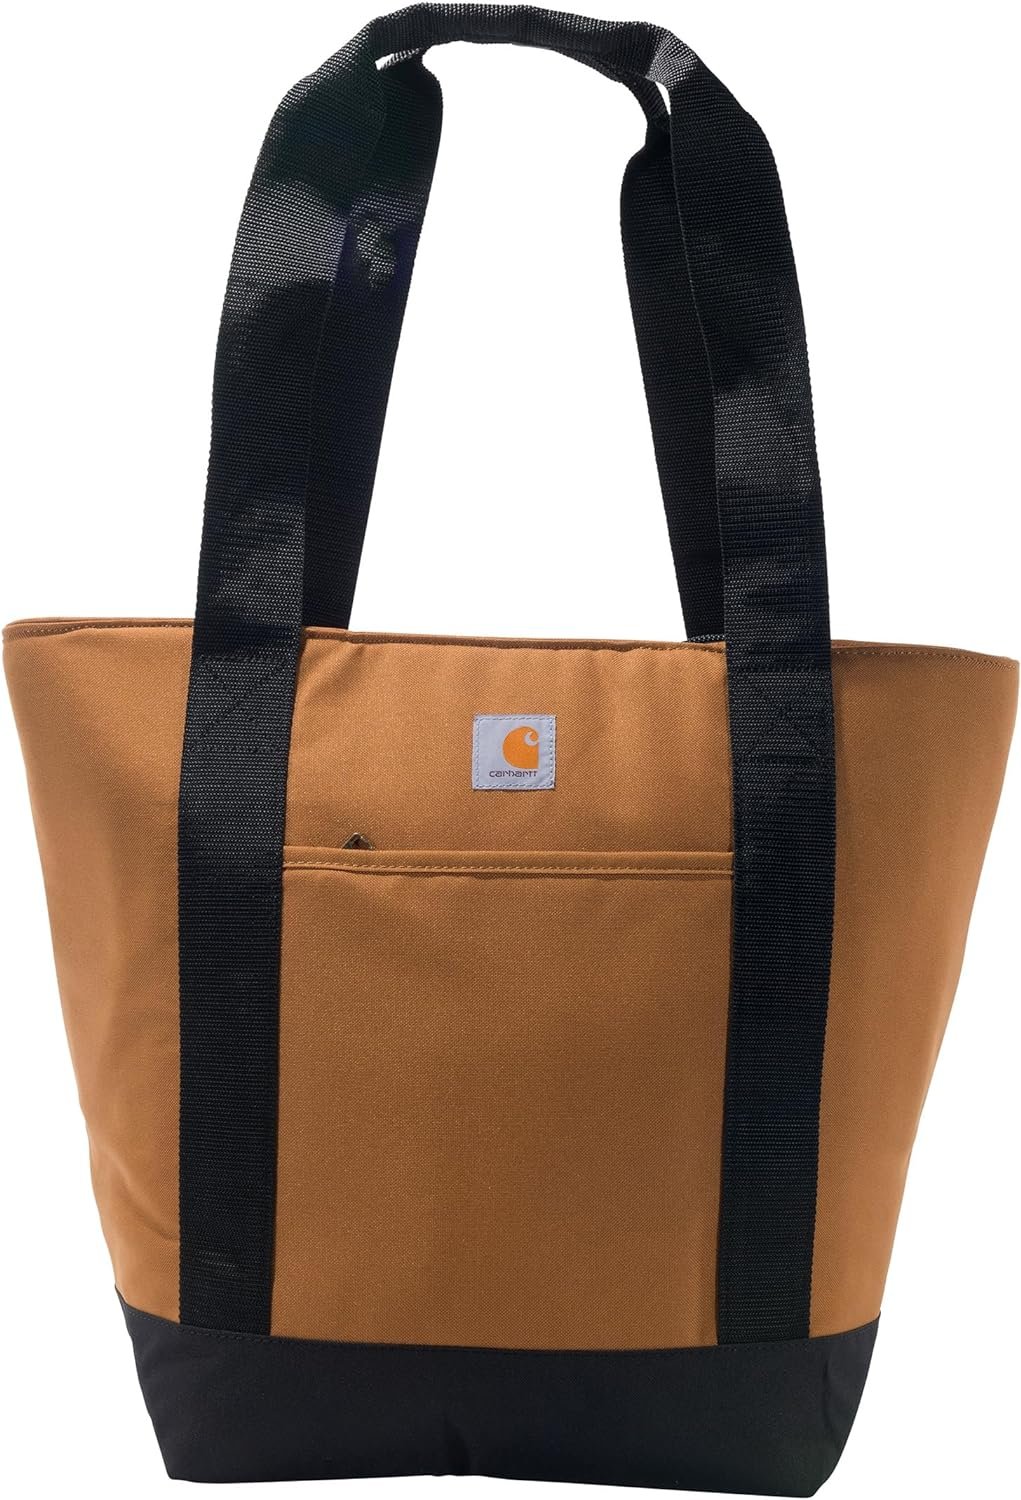 Carhartt Large Insulated Convertible Backpack Cooler Tote